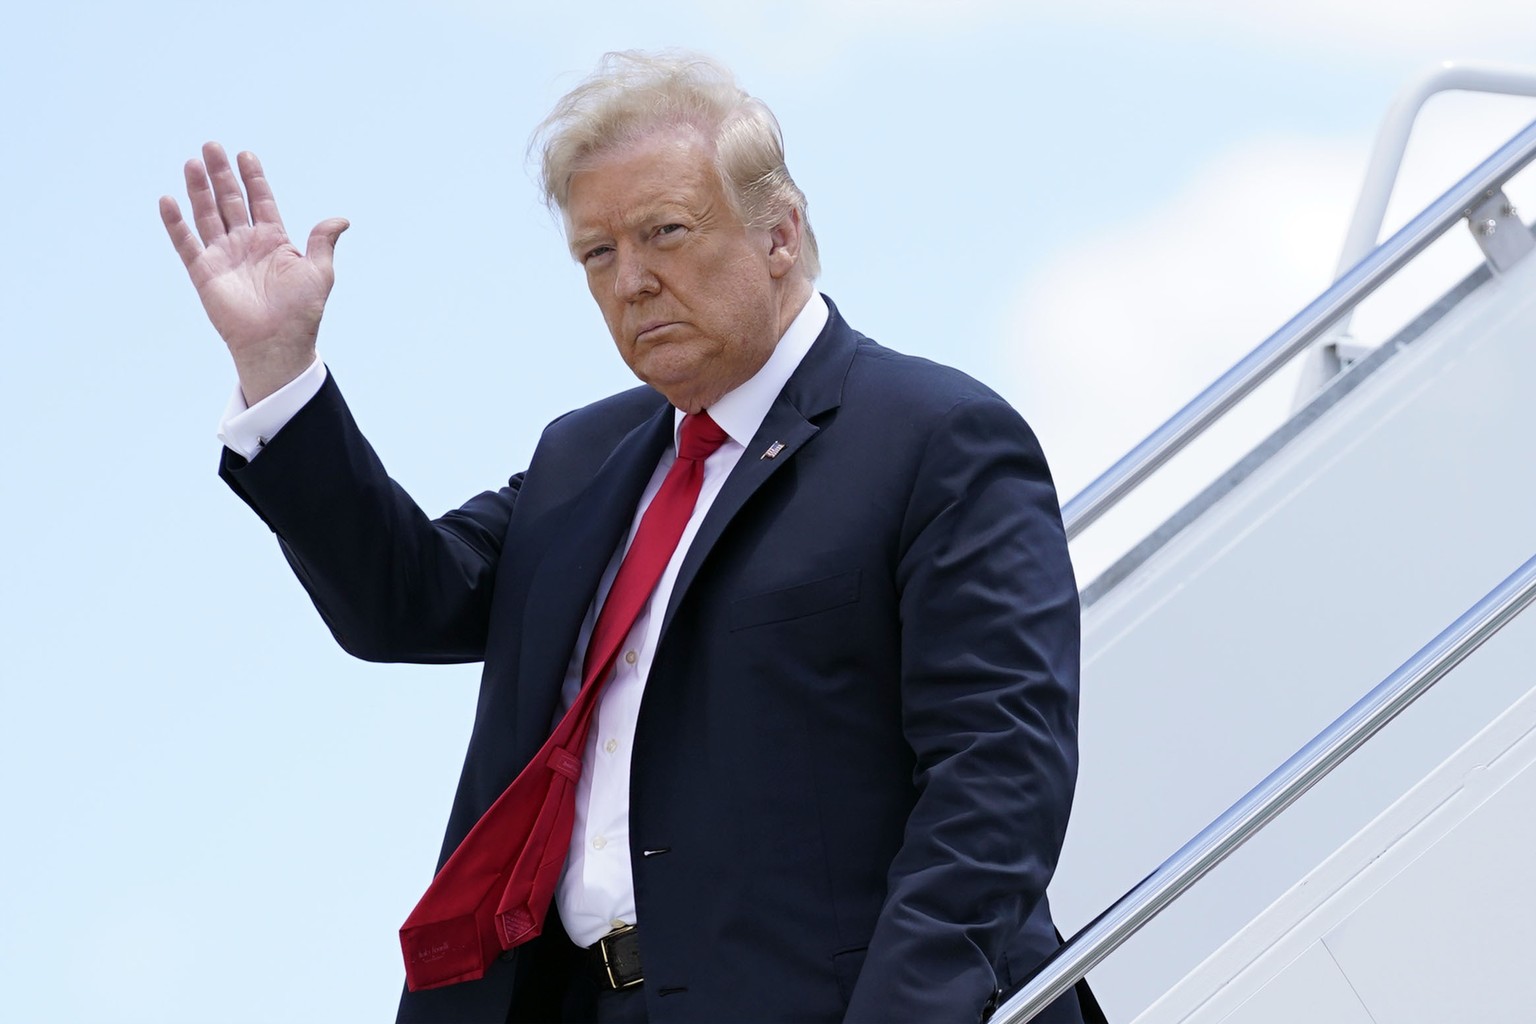 FILE - In this Thursday, June 25, 2020 file photo, President Donald Trump waves as he arrives on Air Force One at Austin Straubel International Airport in Green Bay, Wis. Iran has issued an arrest war ...